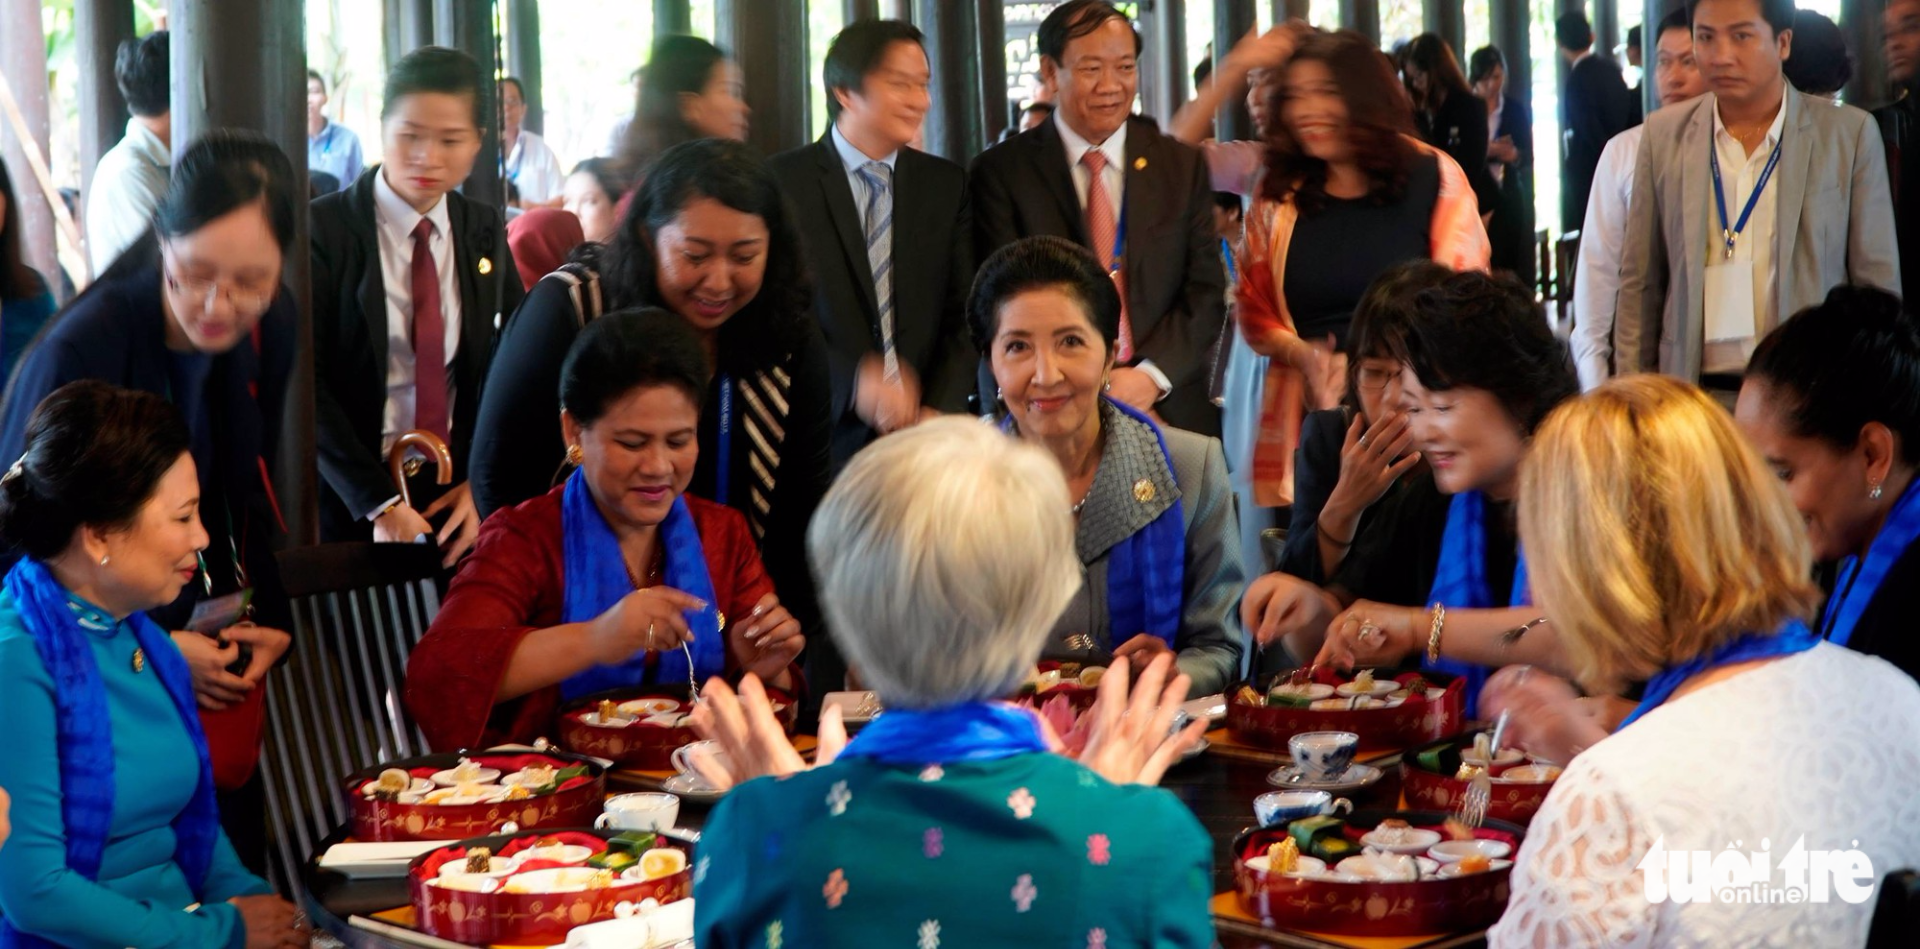 Spouses of APEC leaders enjoy traditional Vietnamese pastries with tea in Hoi An Ancient Town, November 11, 2017. Photo: Tuoi Tre